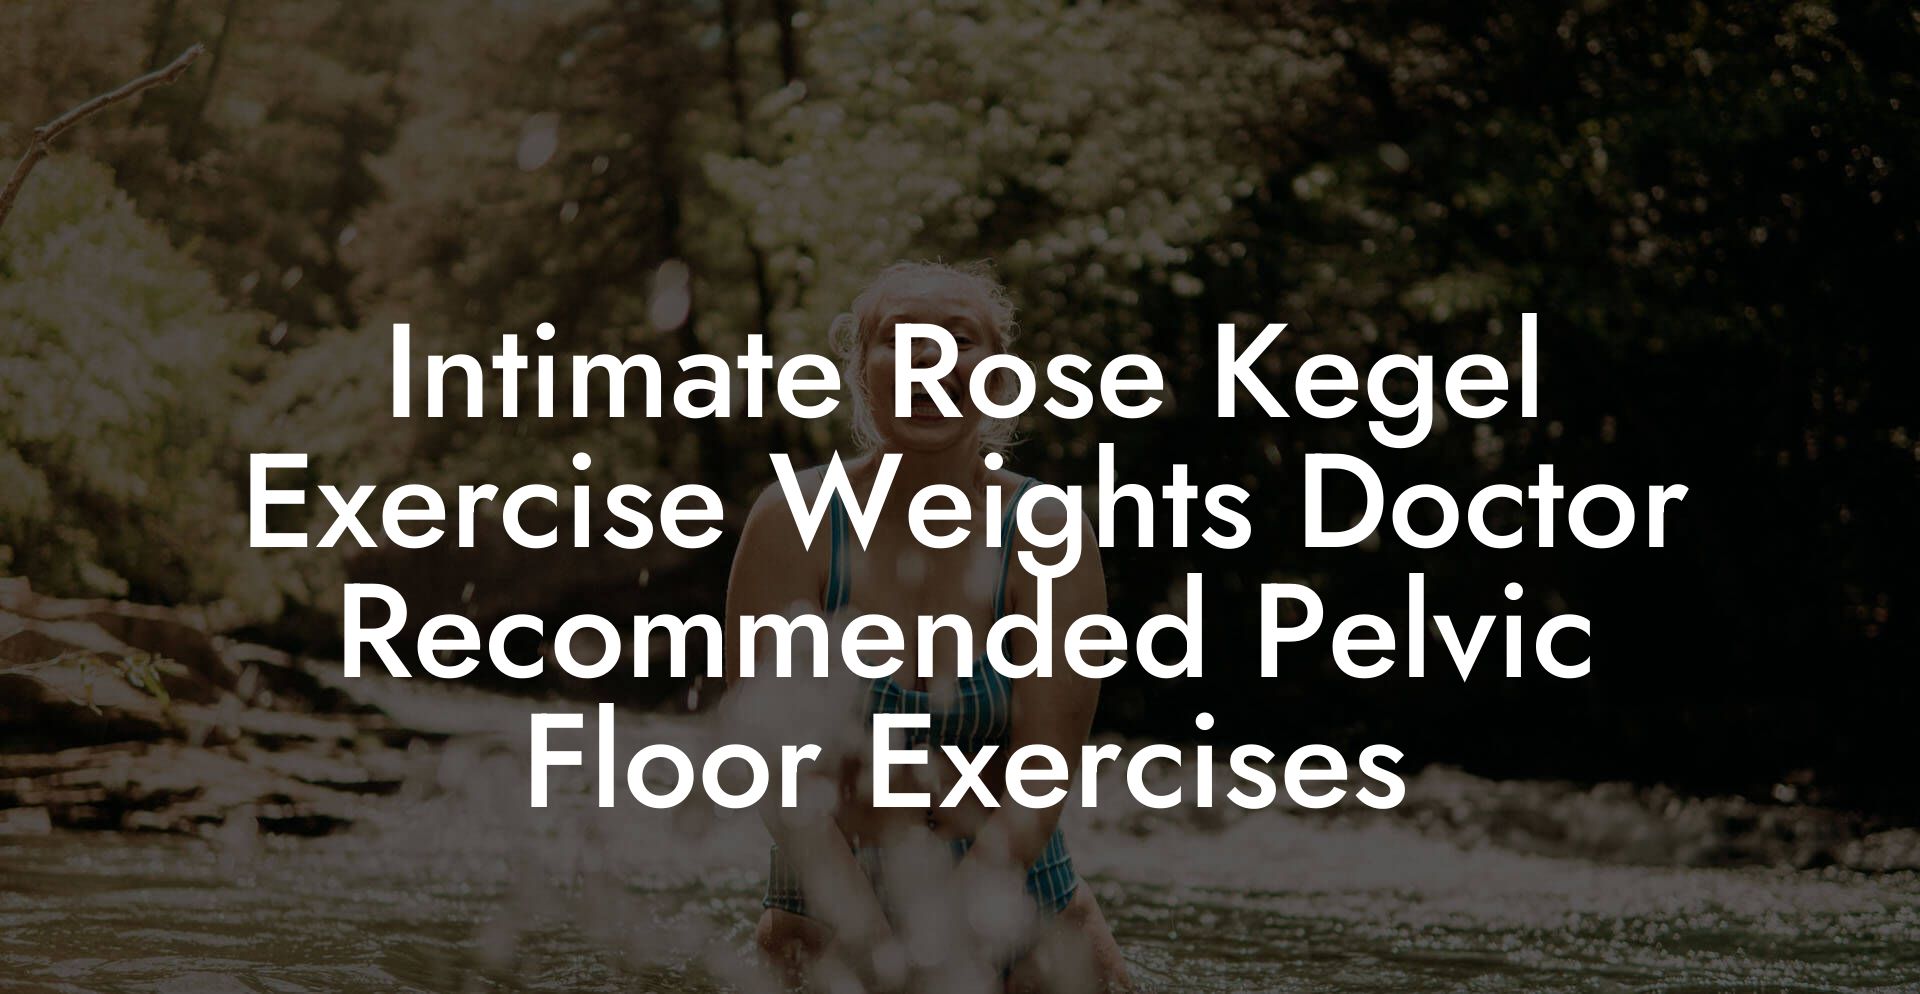 Intimate Rose Kegel Exercise Weights Doctor Recommended Pelvic Floor Exercises